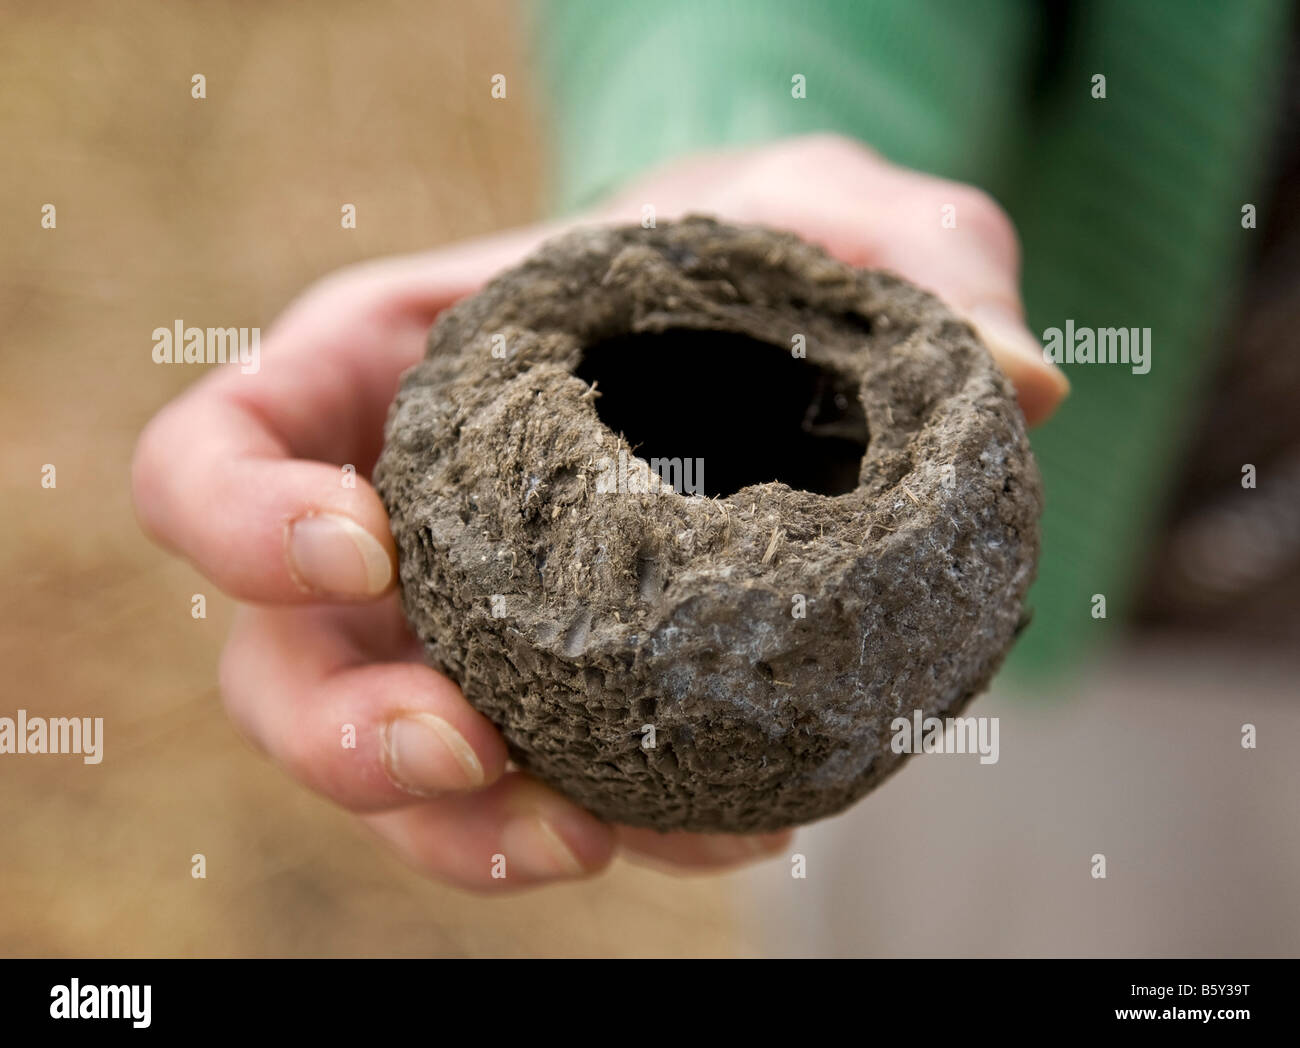 Dung beetle larval chamber at South Luangwa National Park in Zambia Stock Photo